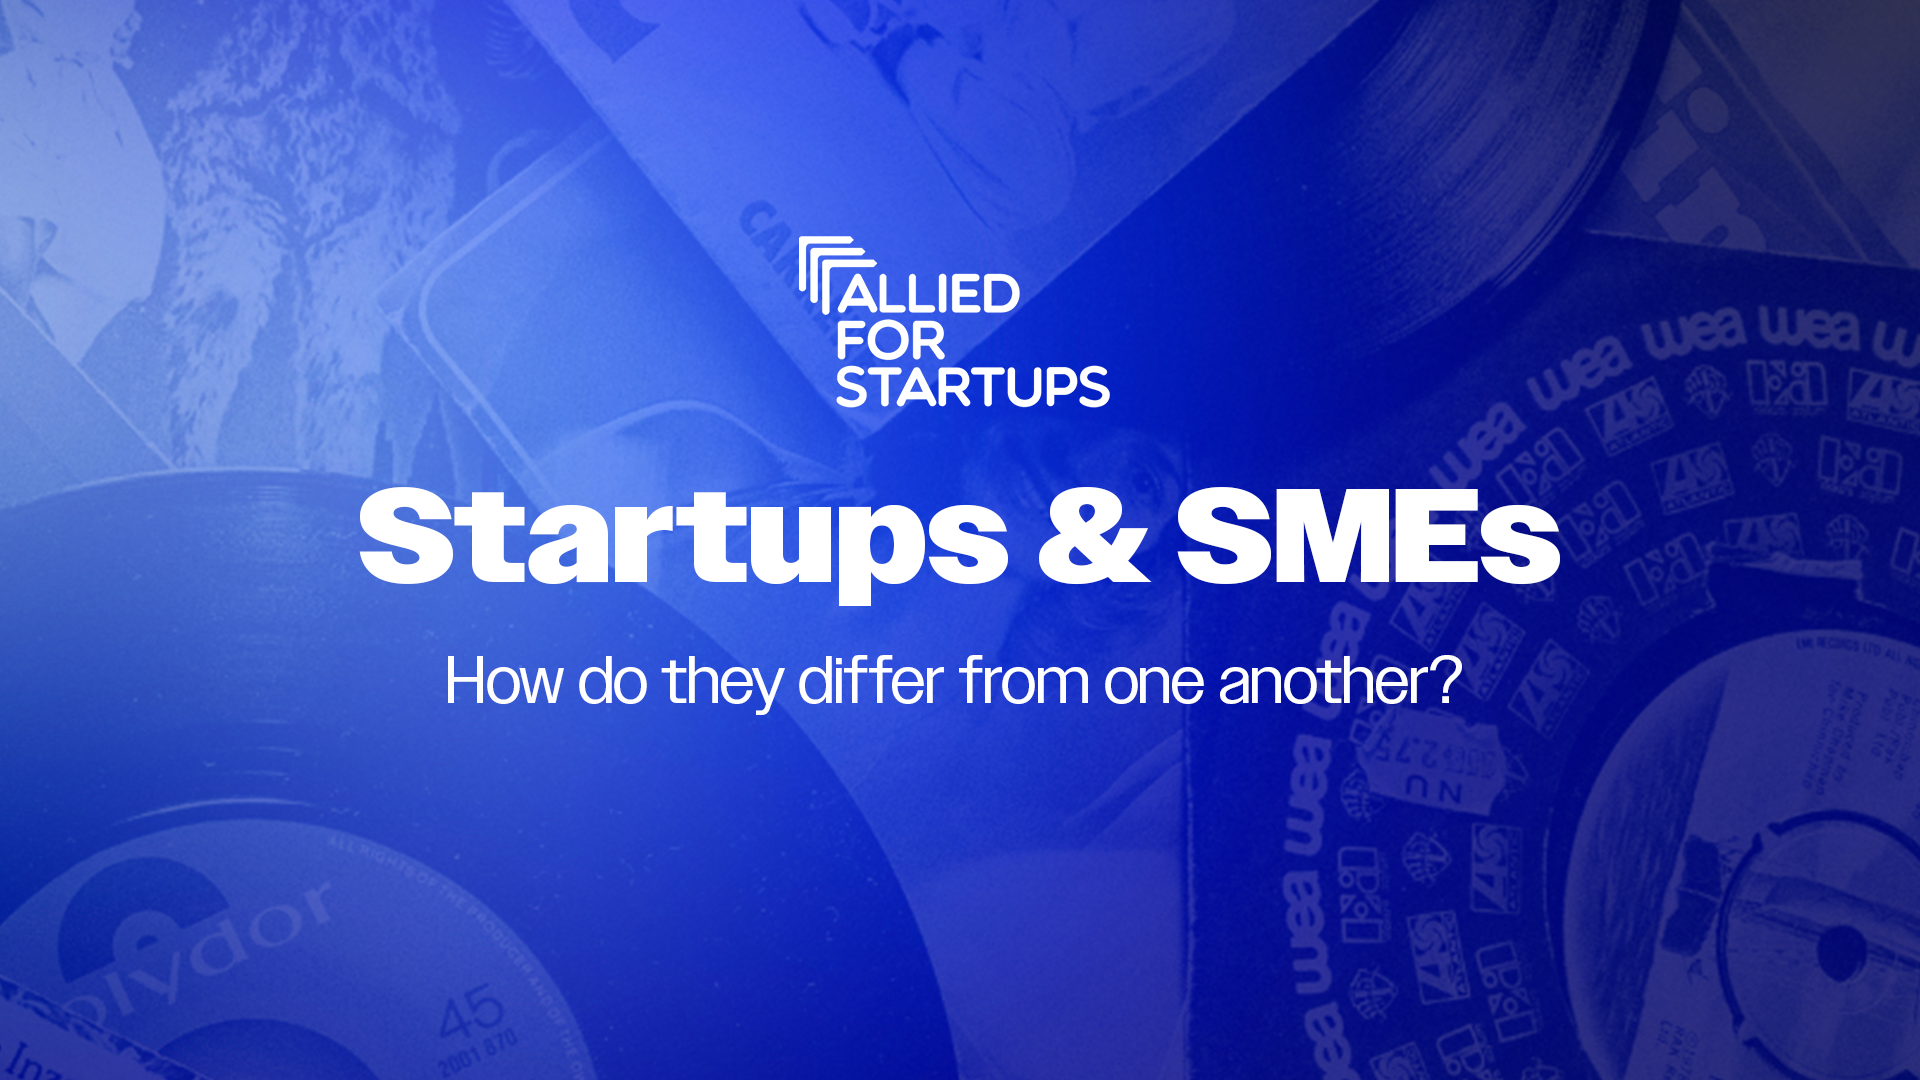 How are startups and SME